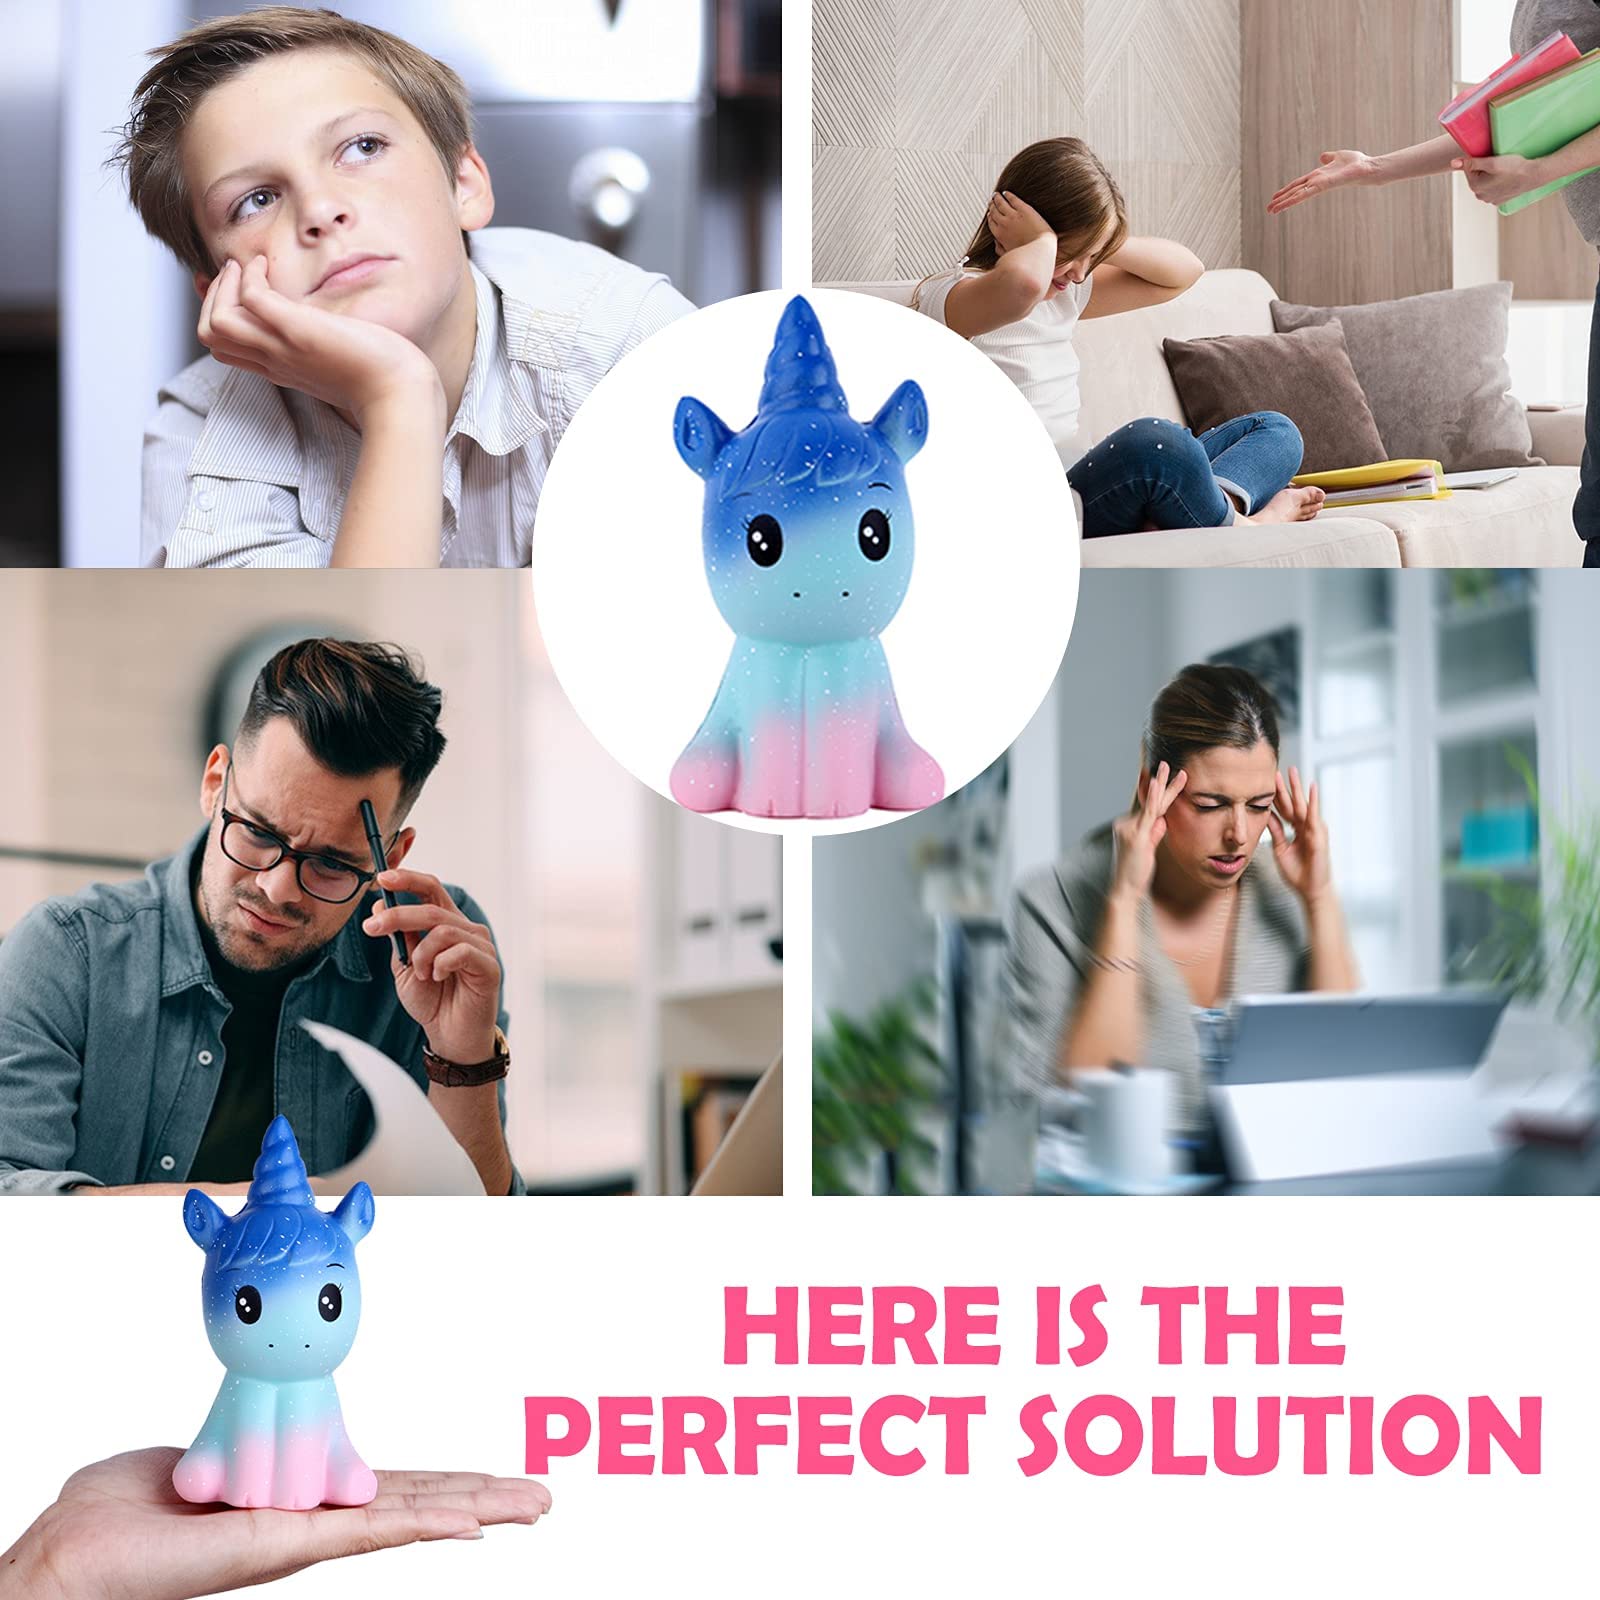 Anboor 4.9 Inches Squishies Unicorn Galaxy Kawaii Soft Slow Rising Scented Animal Squishies Stress Relief Kids Toys (Galaxy + White)